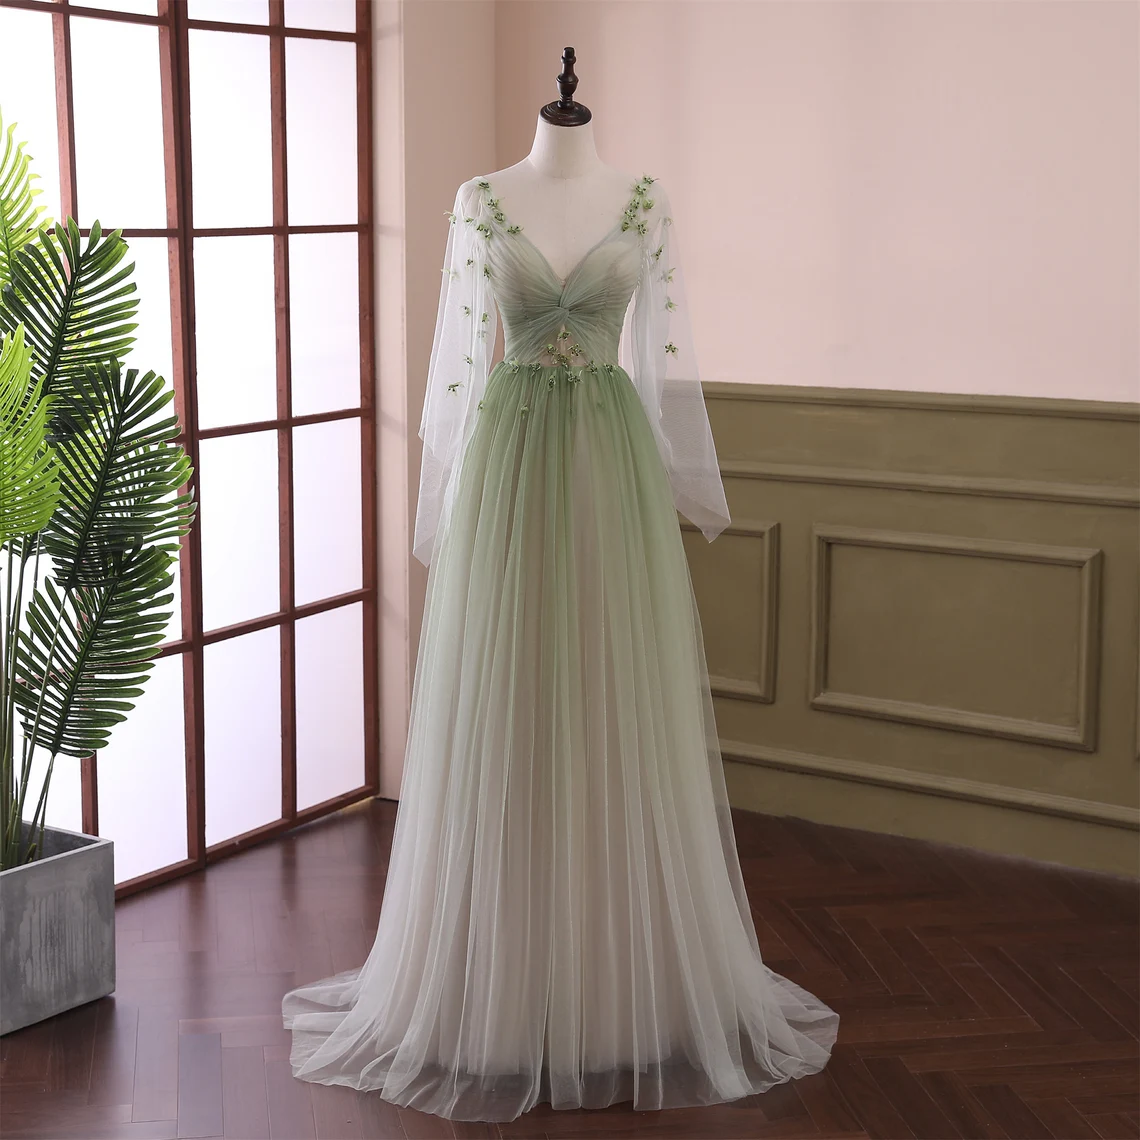 Beautiful Gradient Tulle Green Beaded Long Sleeves Party Dress, Green Corset Formal Dress outfit, Prom Dress Long Open Back